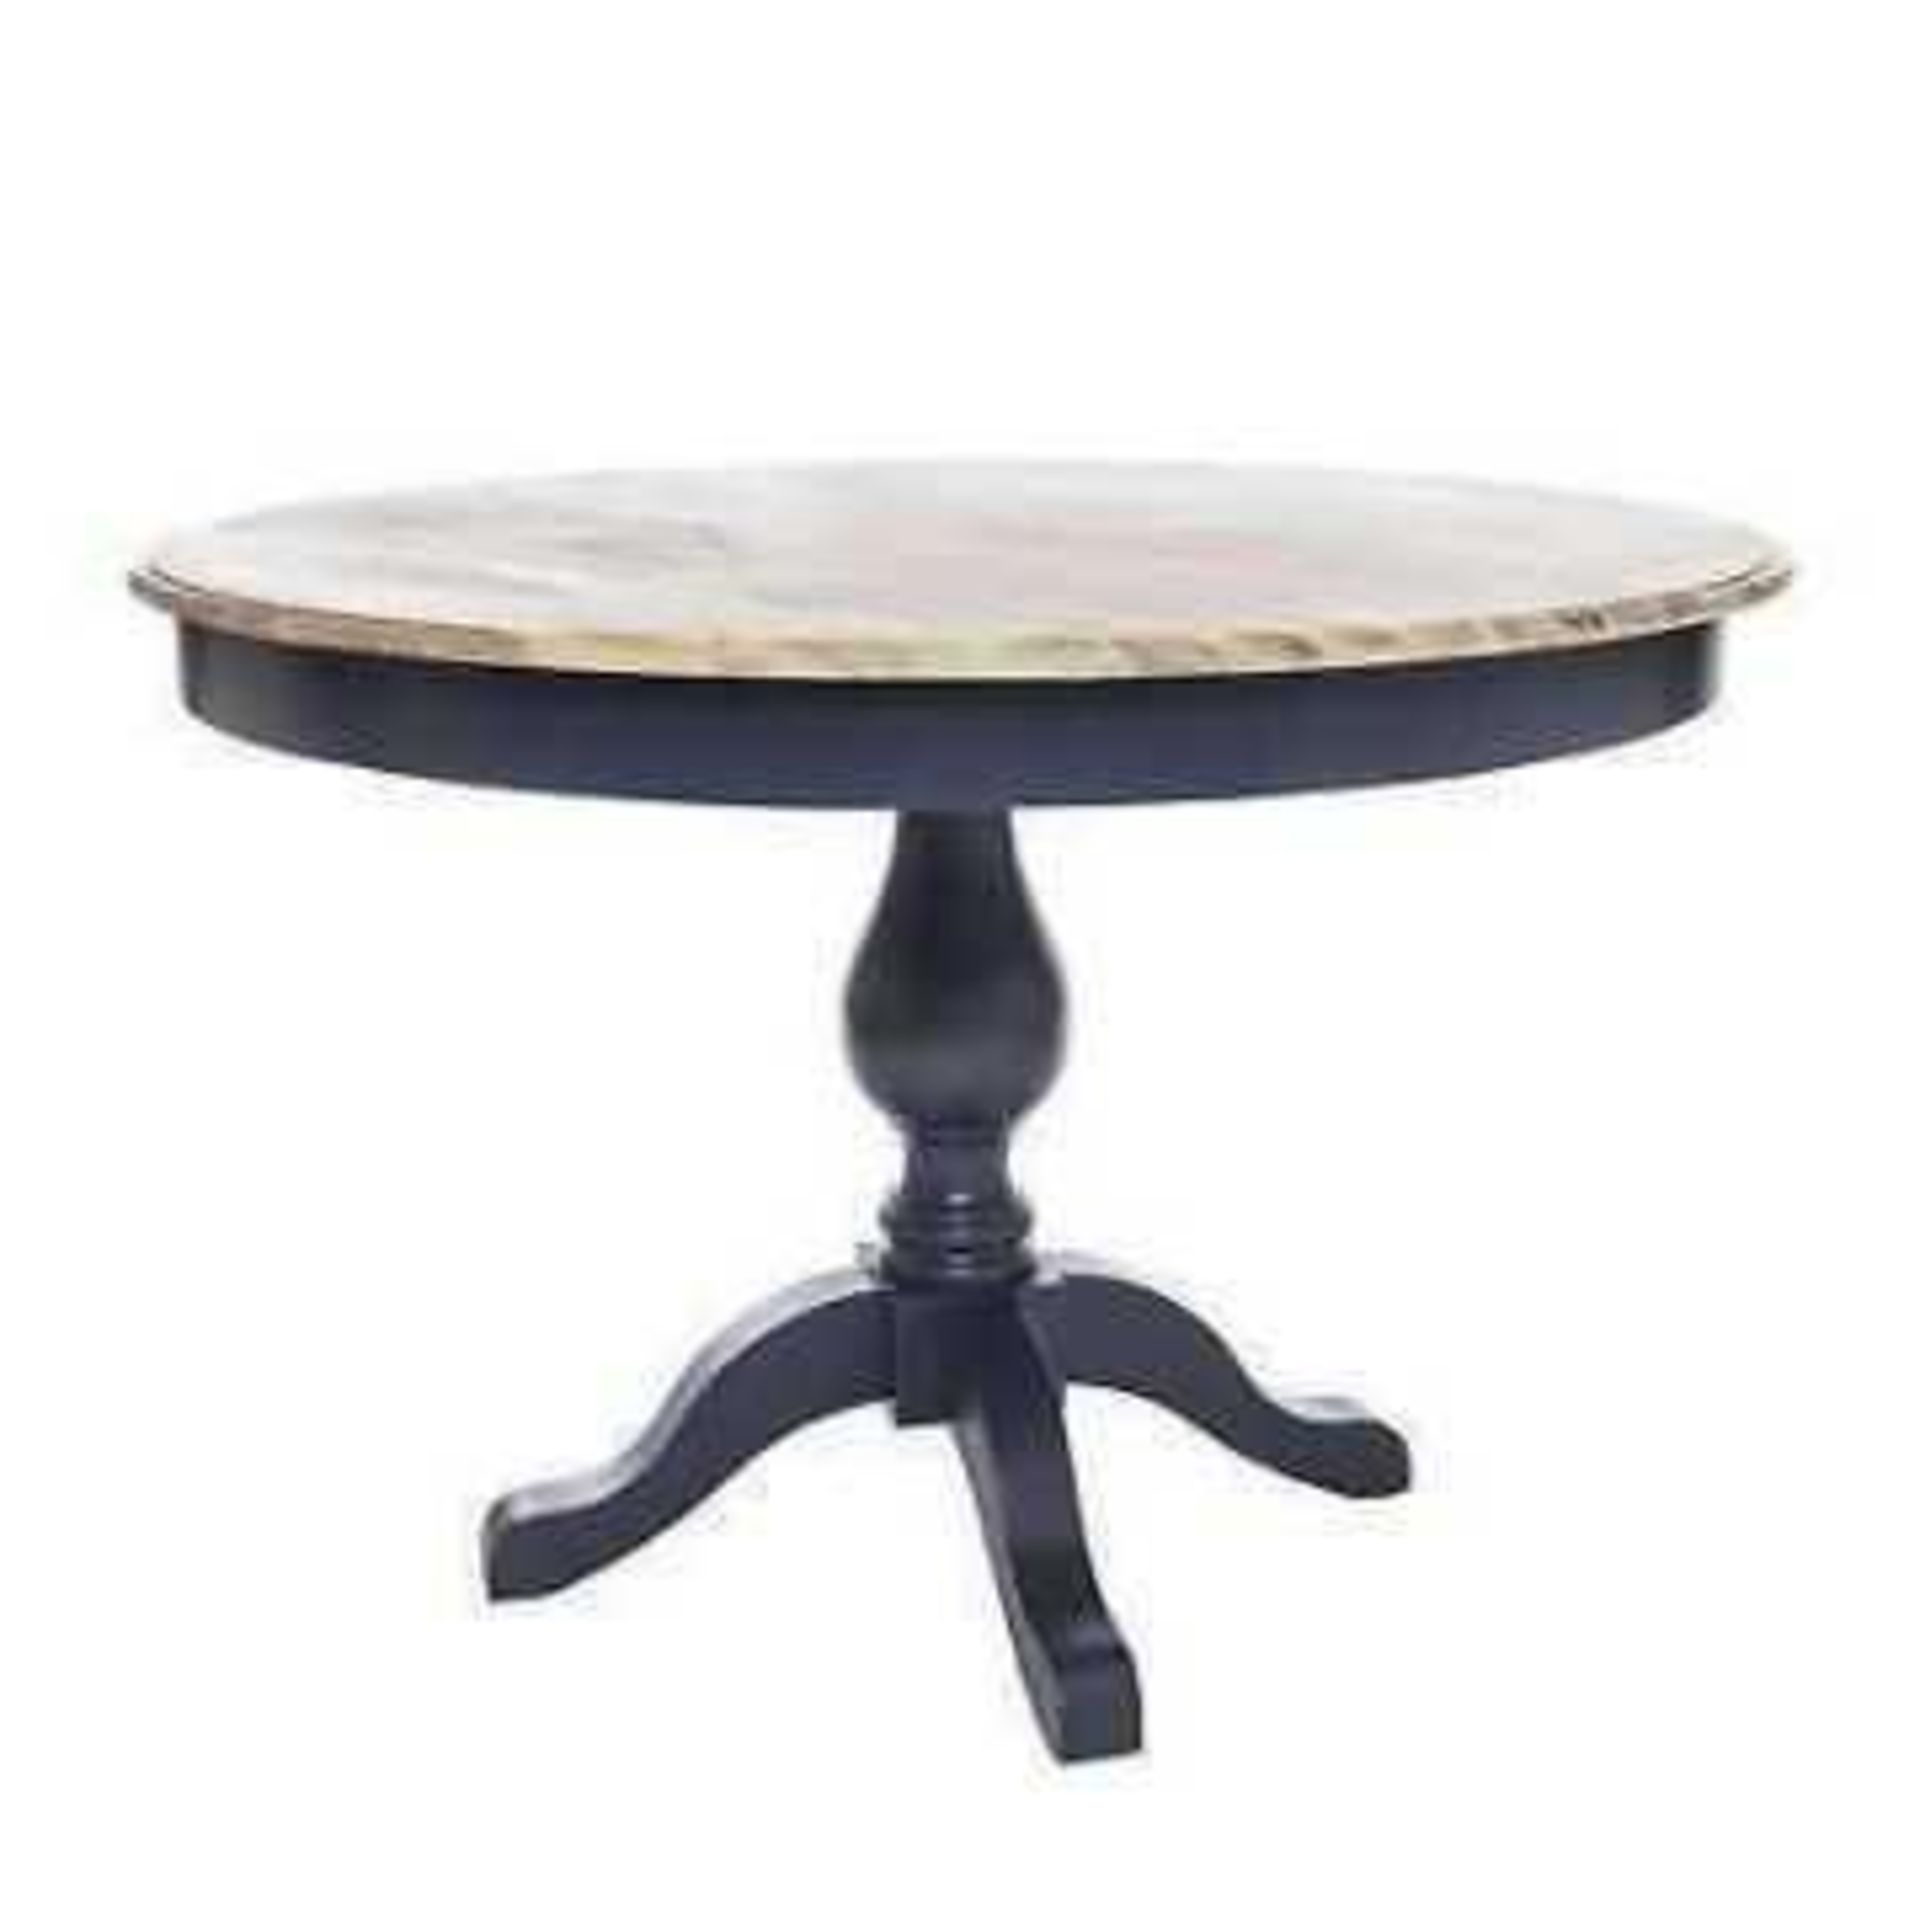 RRP £250 - Boxed New Green Oval Fixed Top Pedestal Table